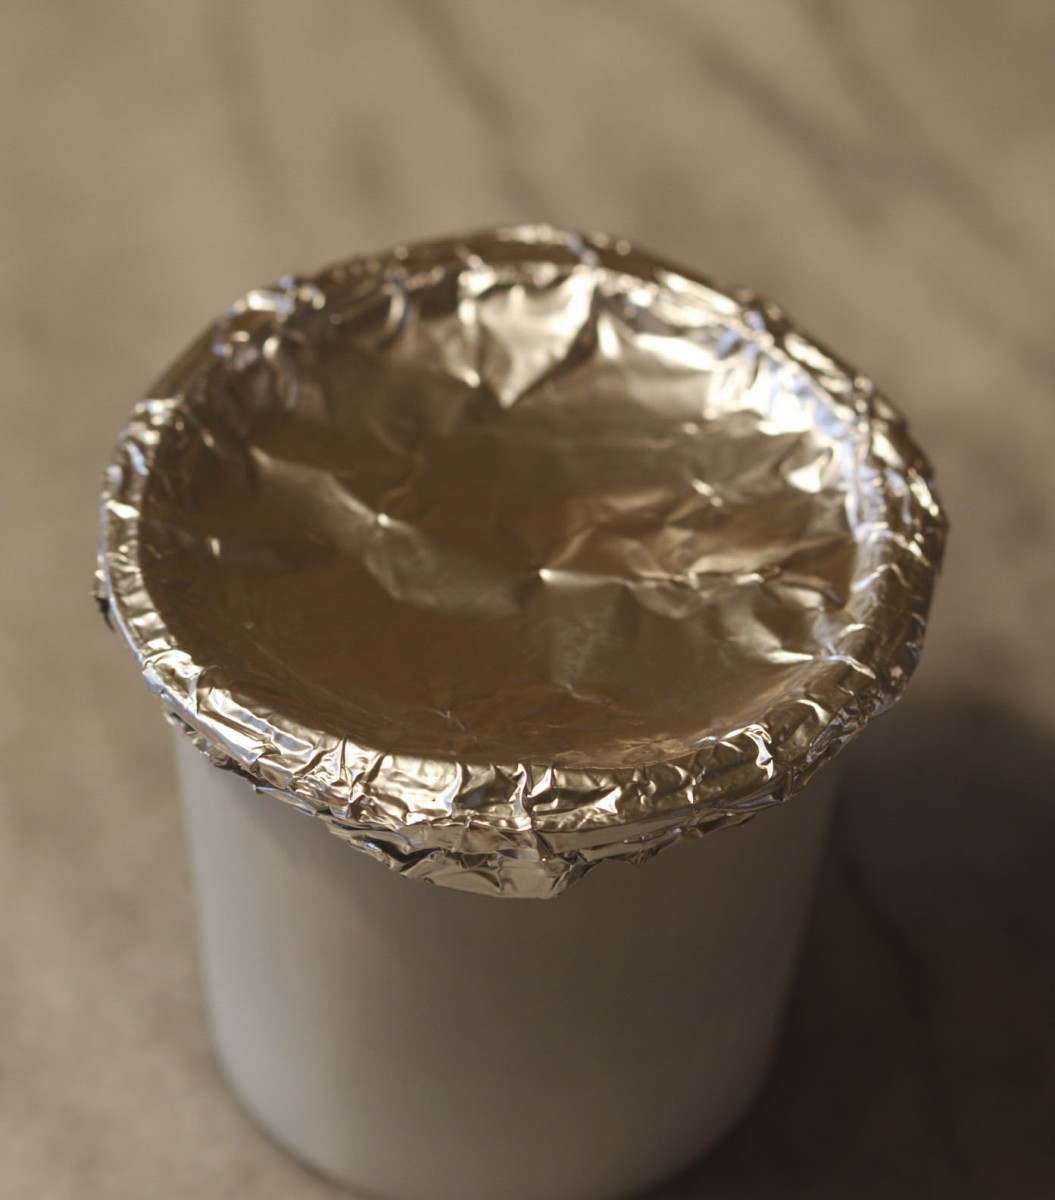 A covered and crimped reused K-cup.